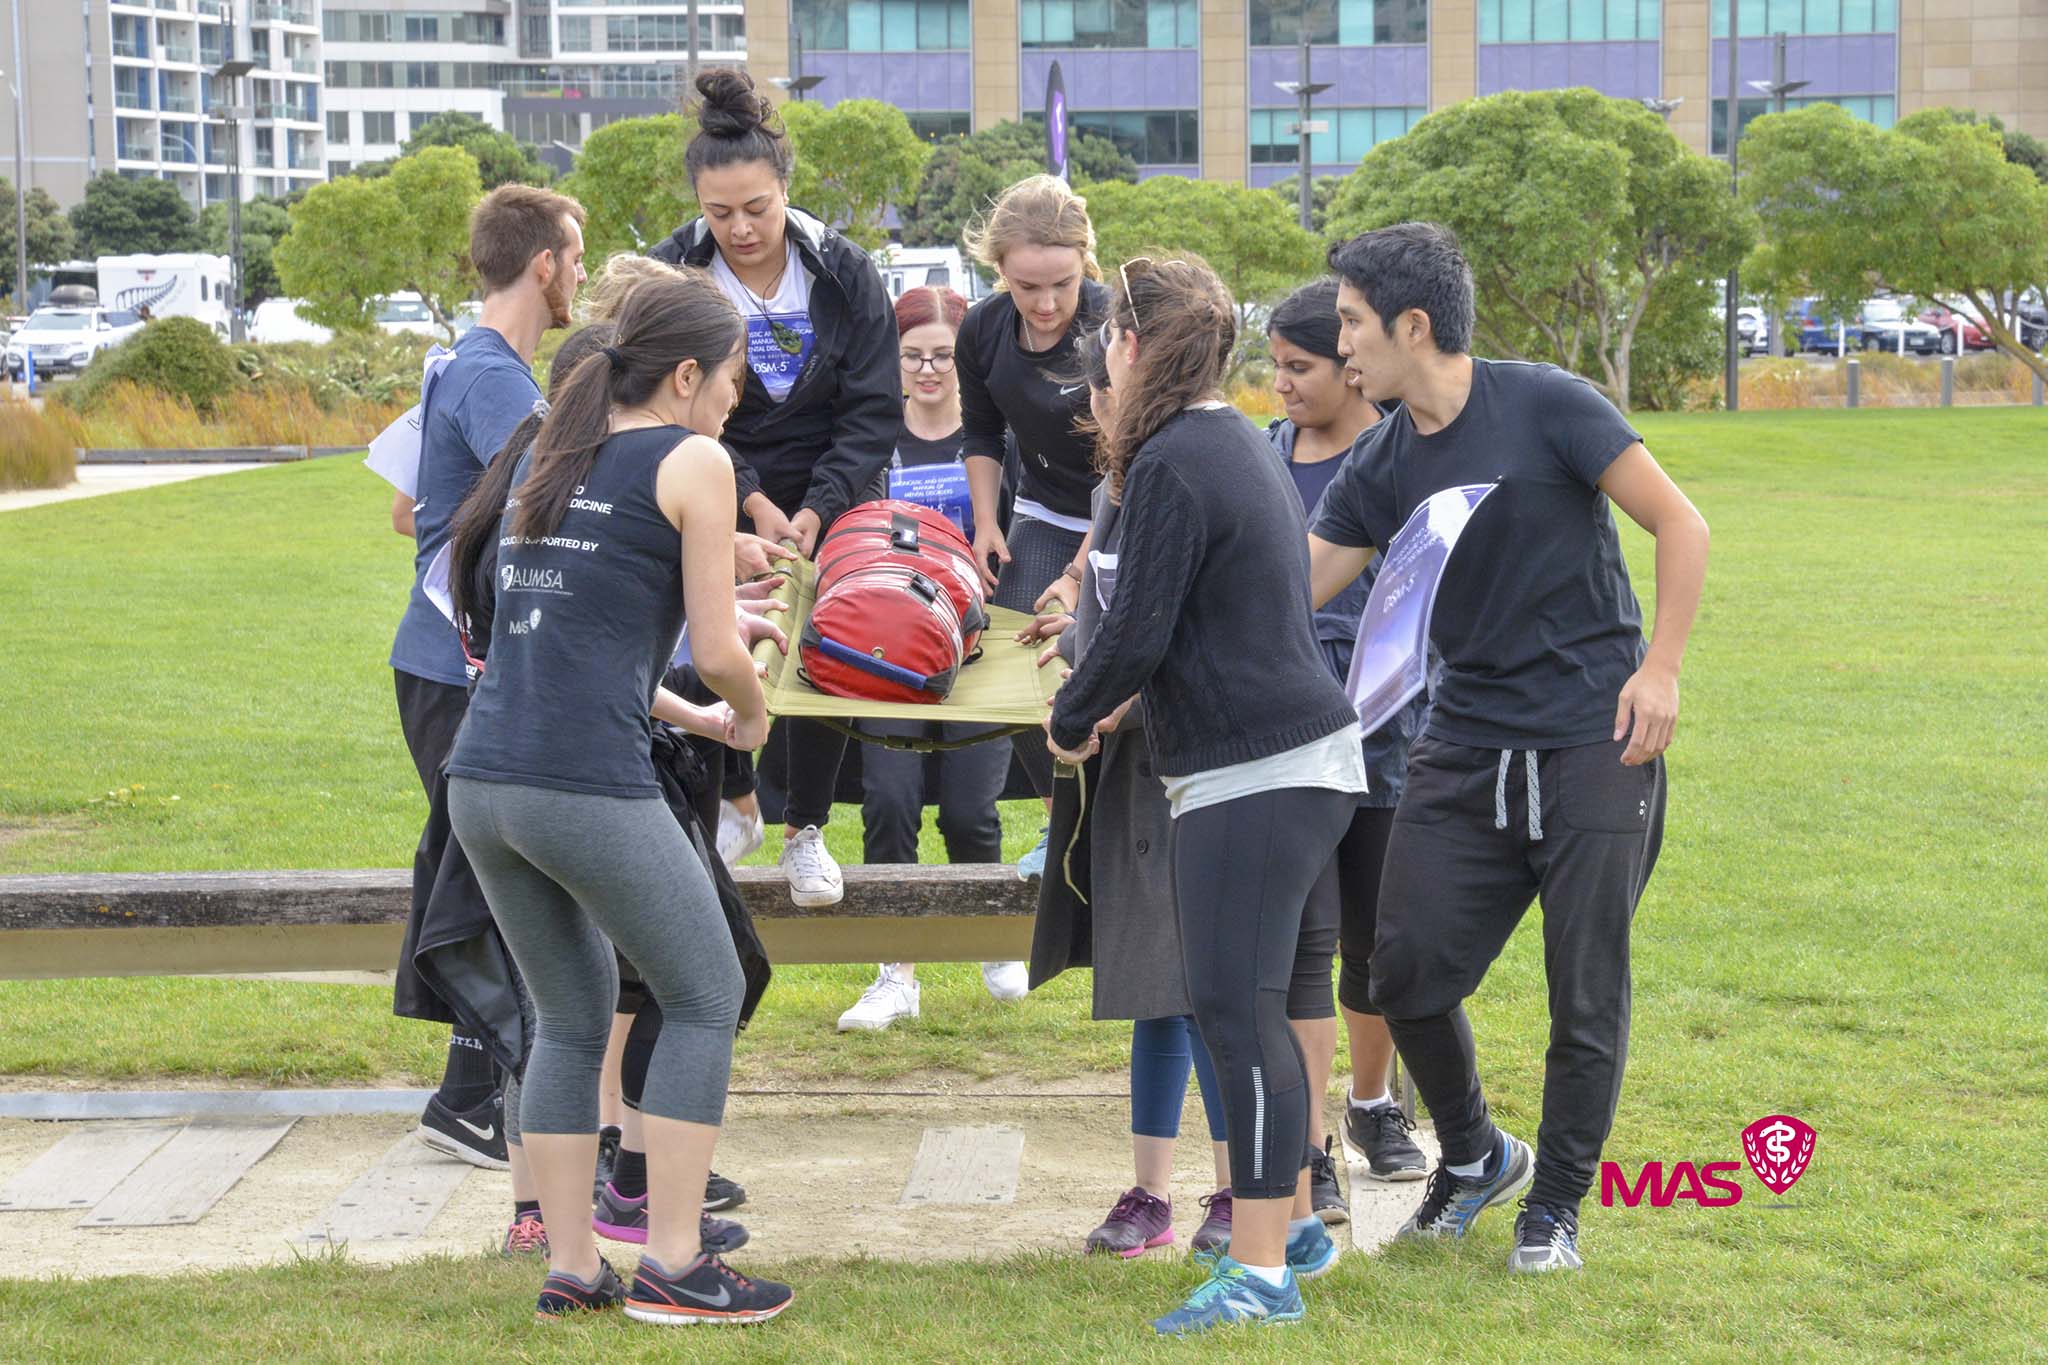 NZ Medical students teams outdoors rescue